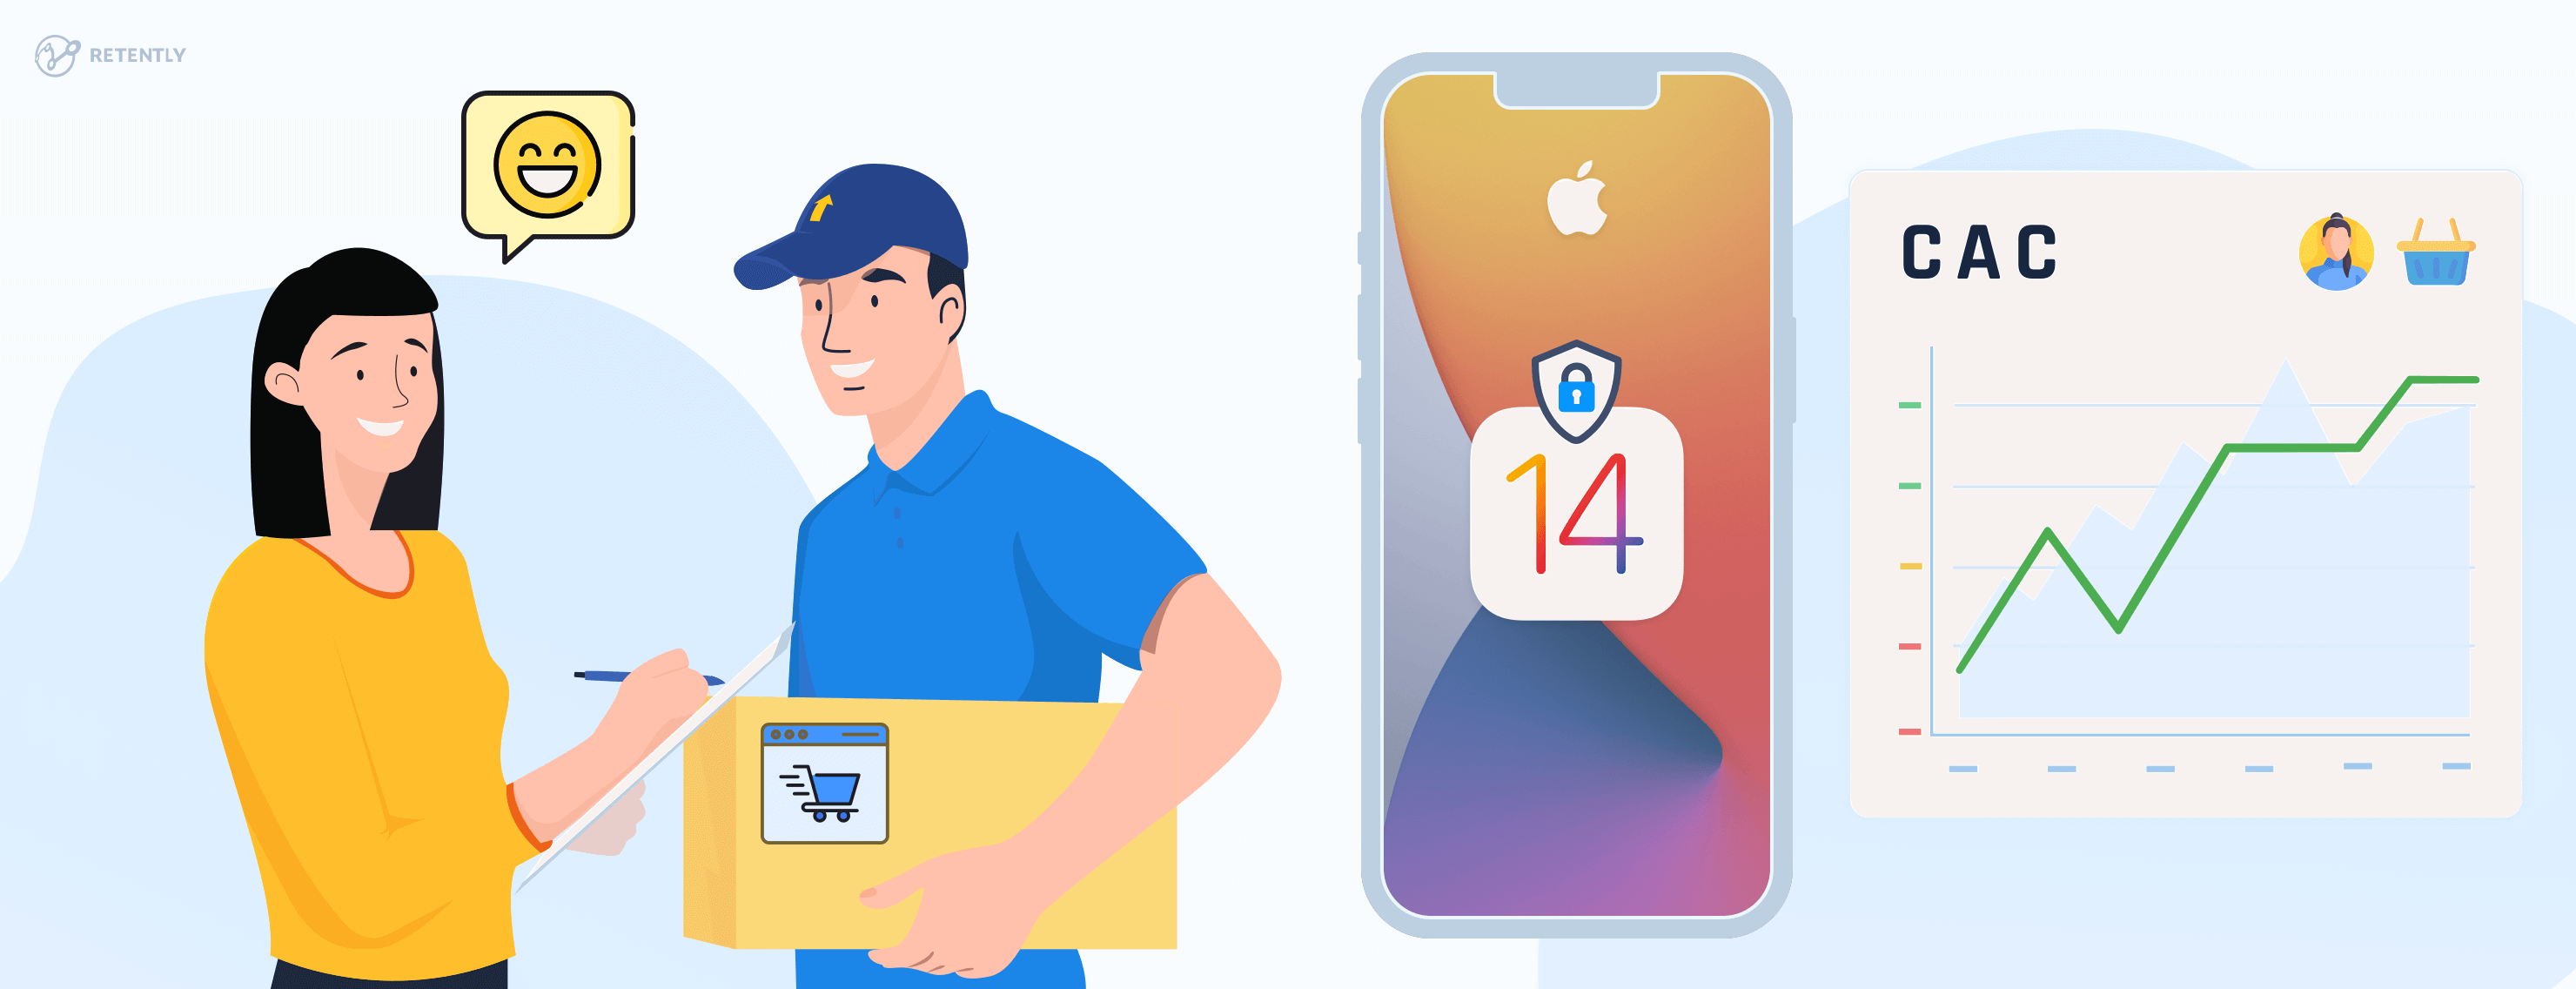 iOS 14.5: The New Frontier of Ecommerce Retention